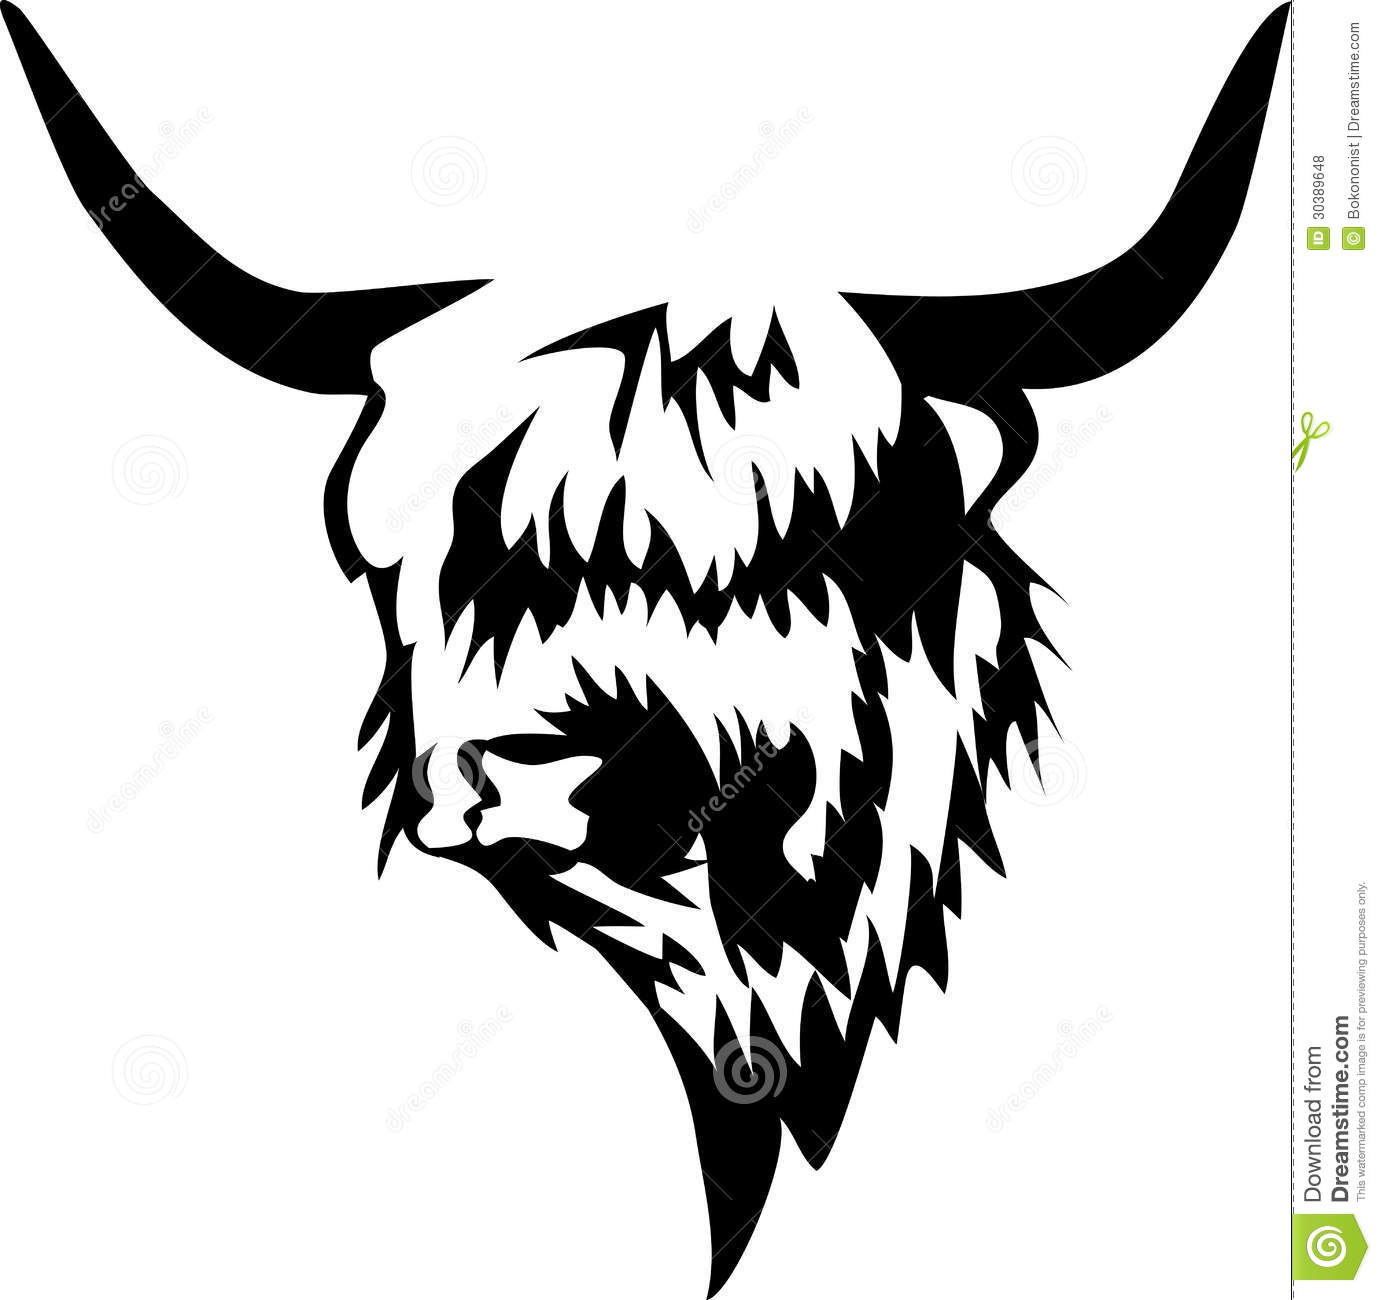 Highland Cattle clipart #1, Download drawings